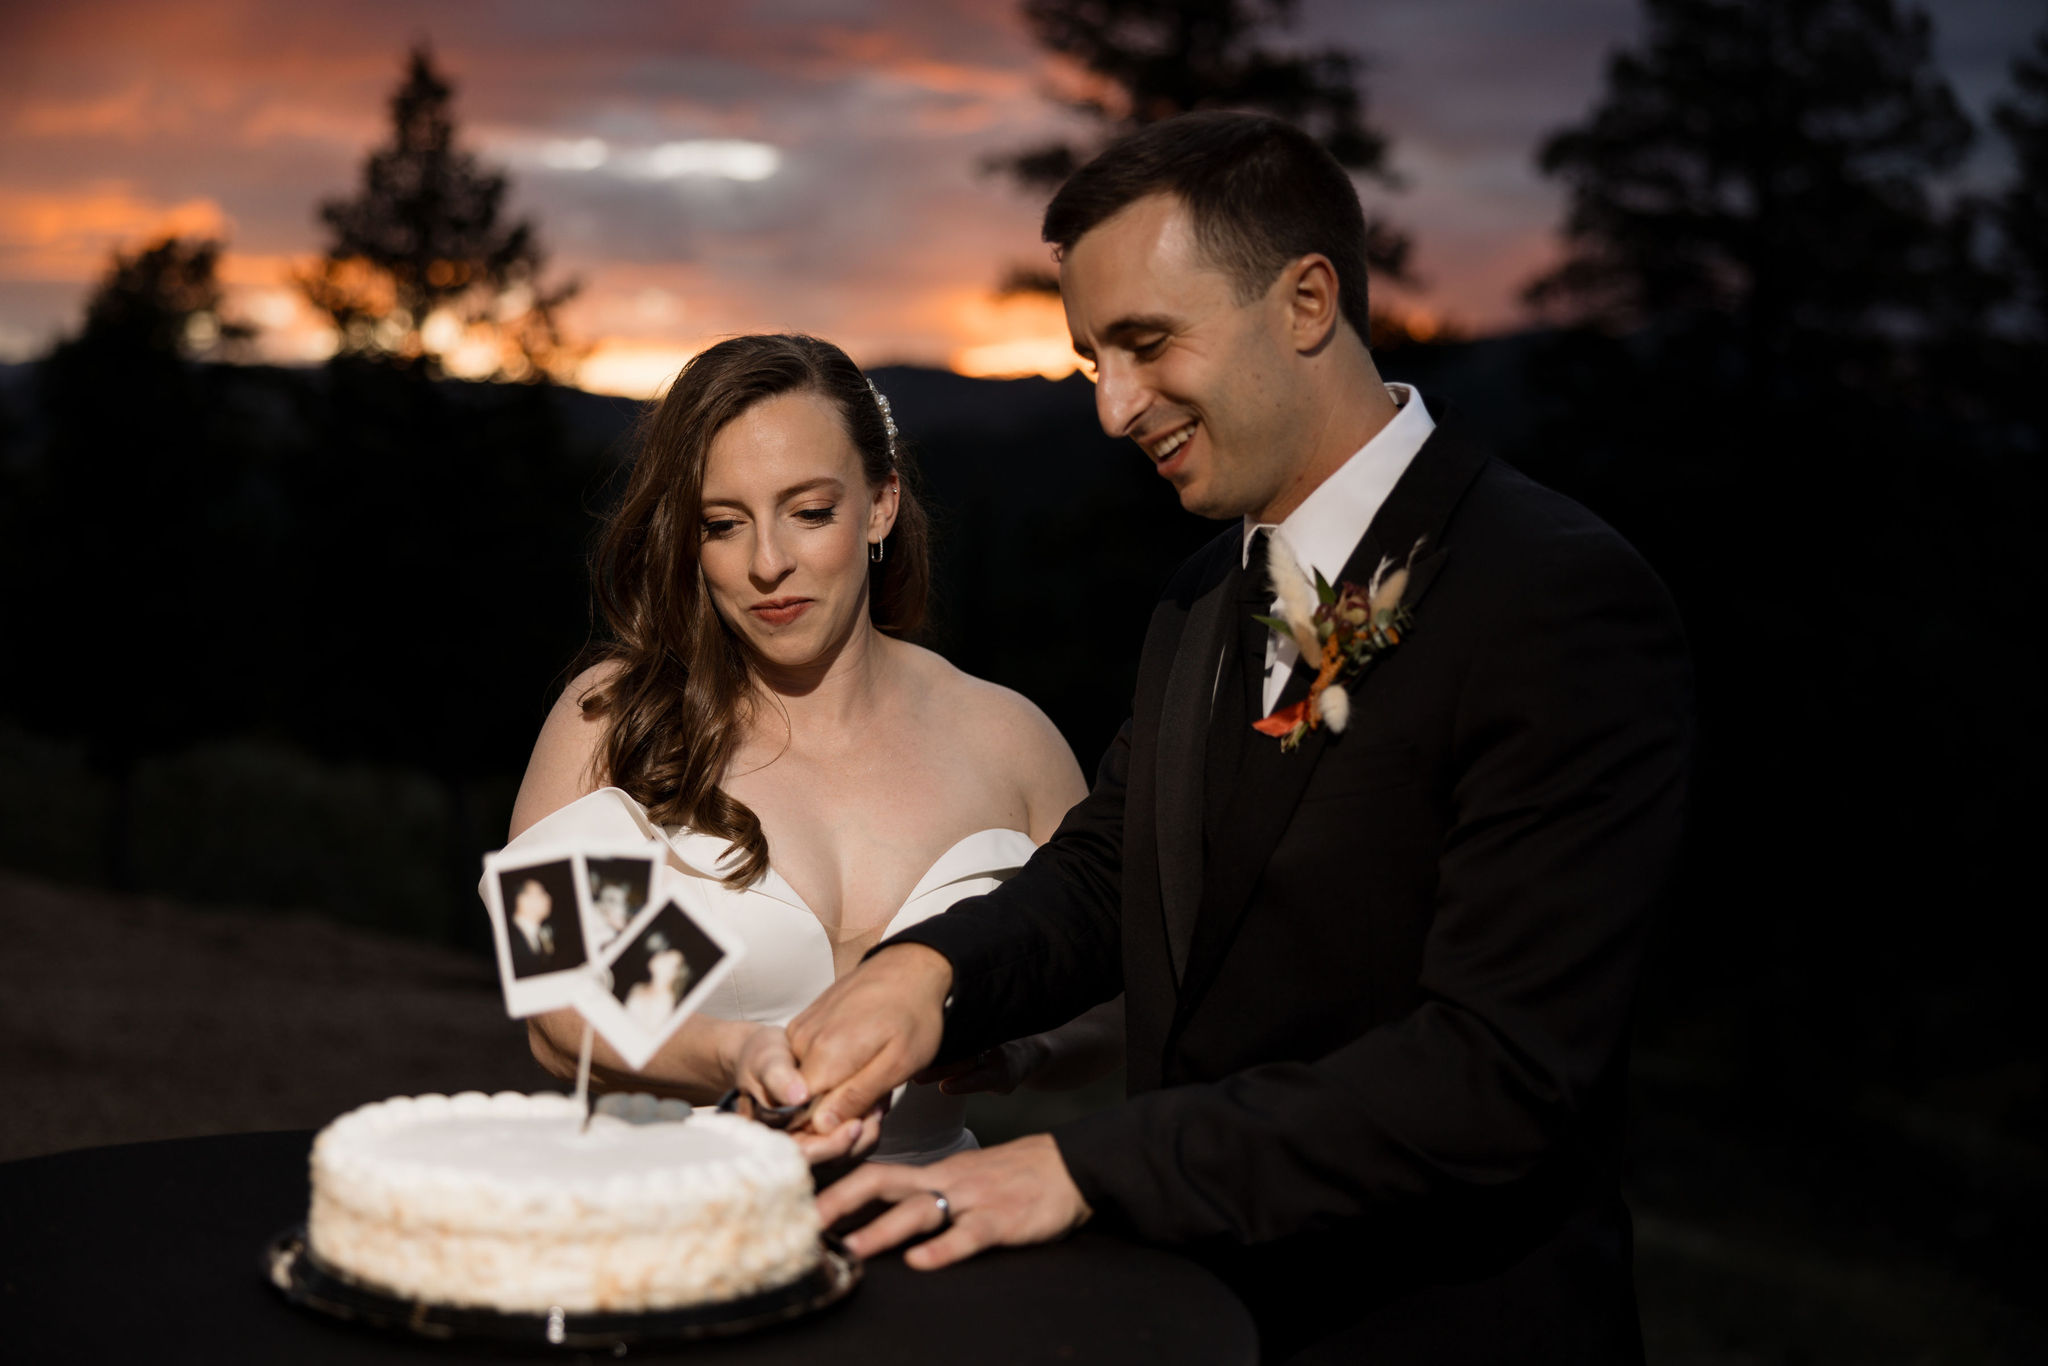 bride and groom cut wedding cake after telling family they eloped